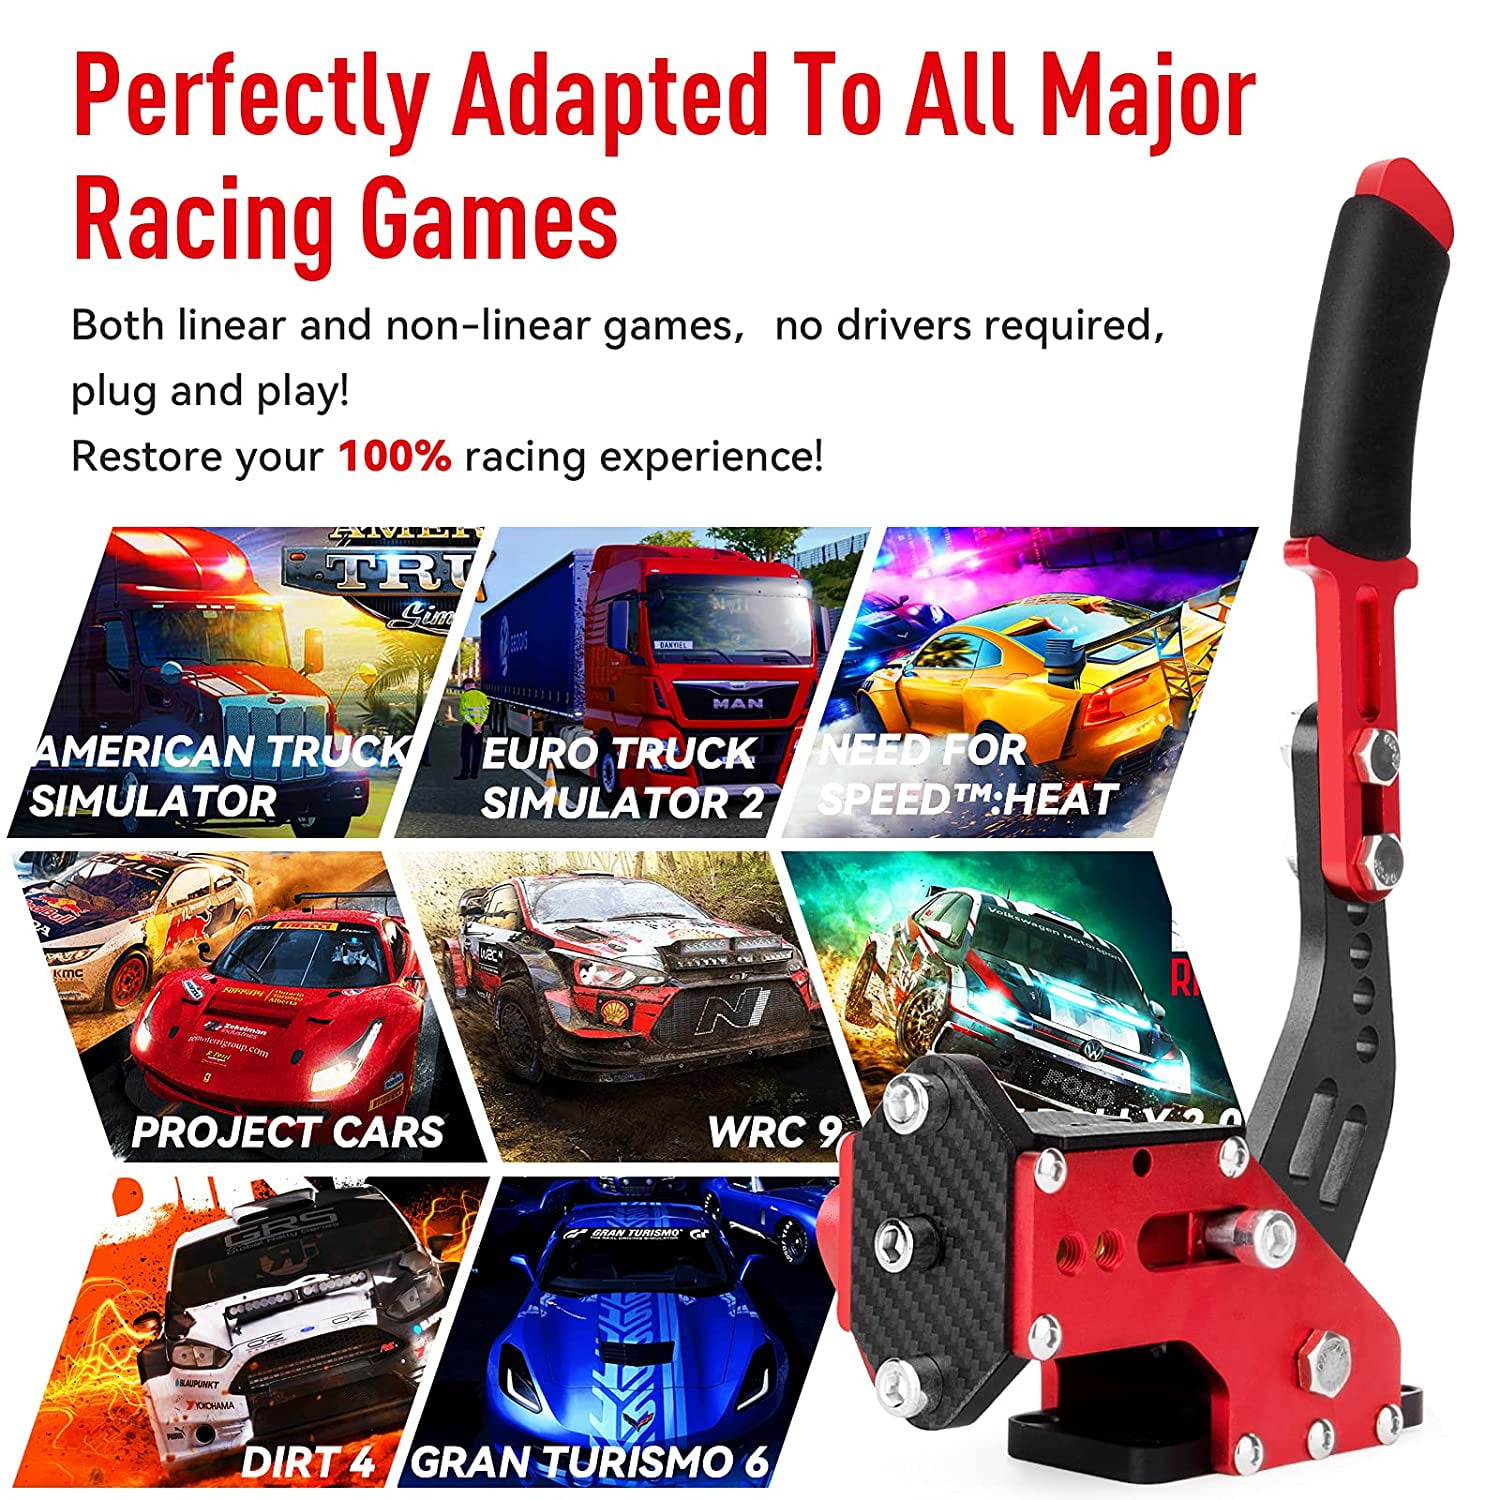 64 Bit USB Handbrake with Clamp for PC Windows Sim Racing Games G25 G27 G29  T500 FANATECOSW Dirt Rally with Handle Grip